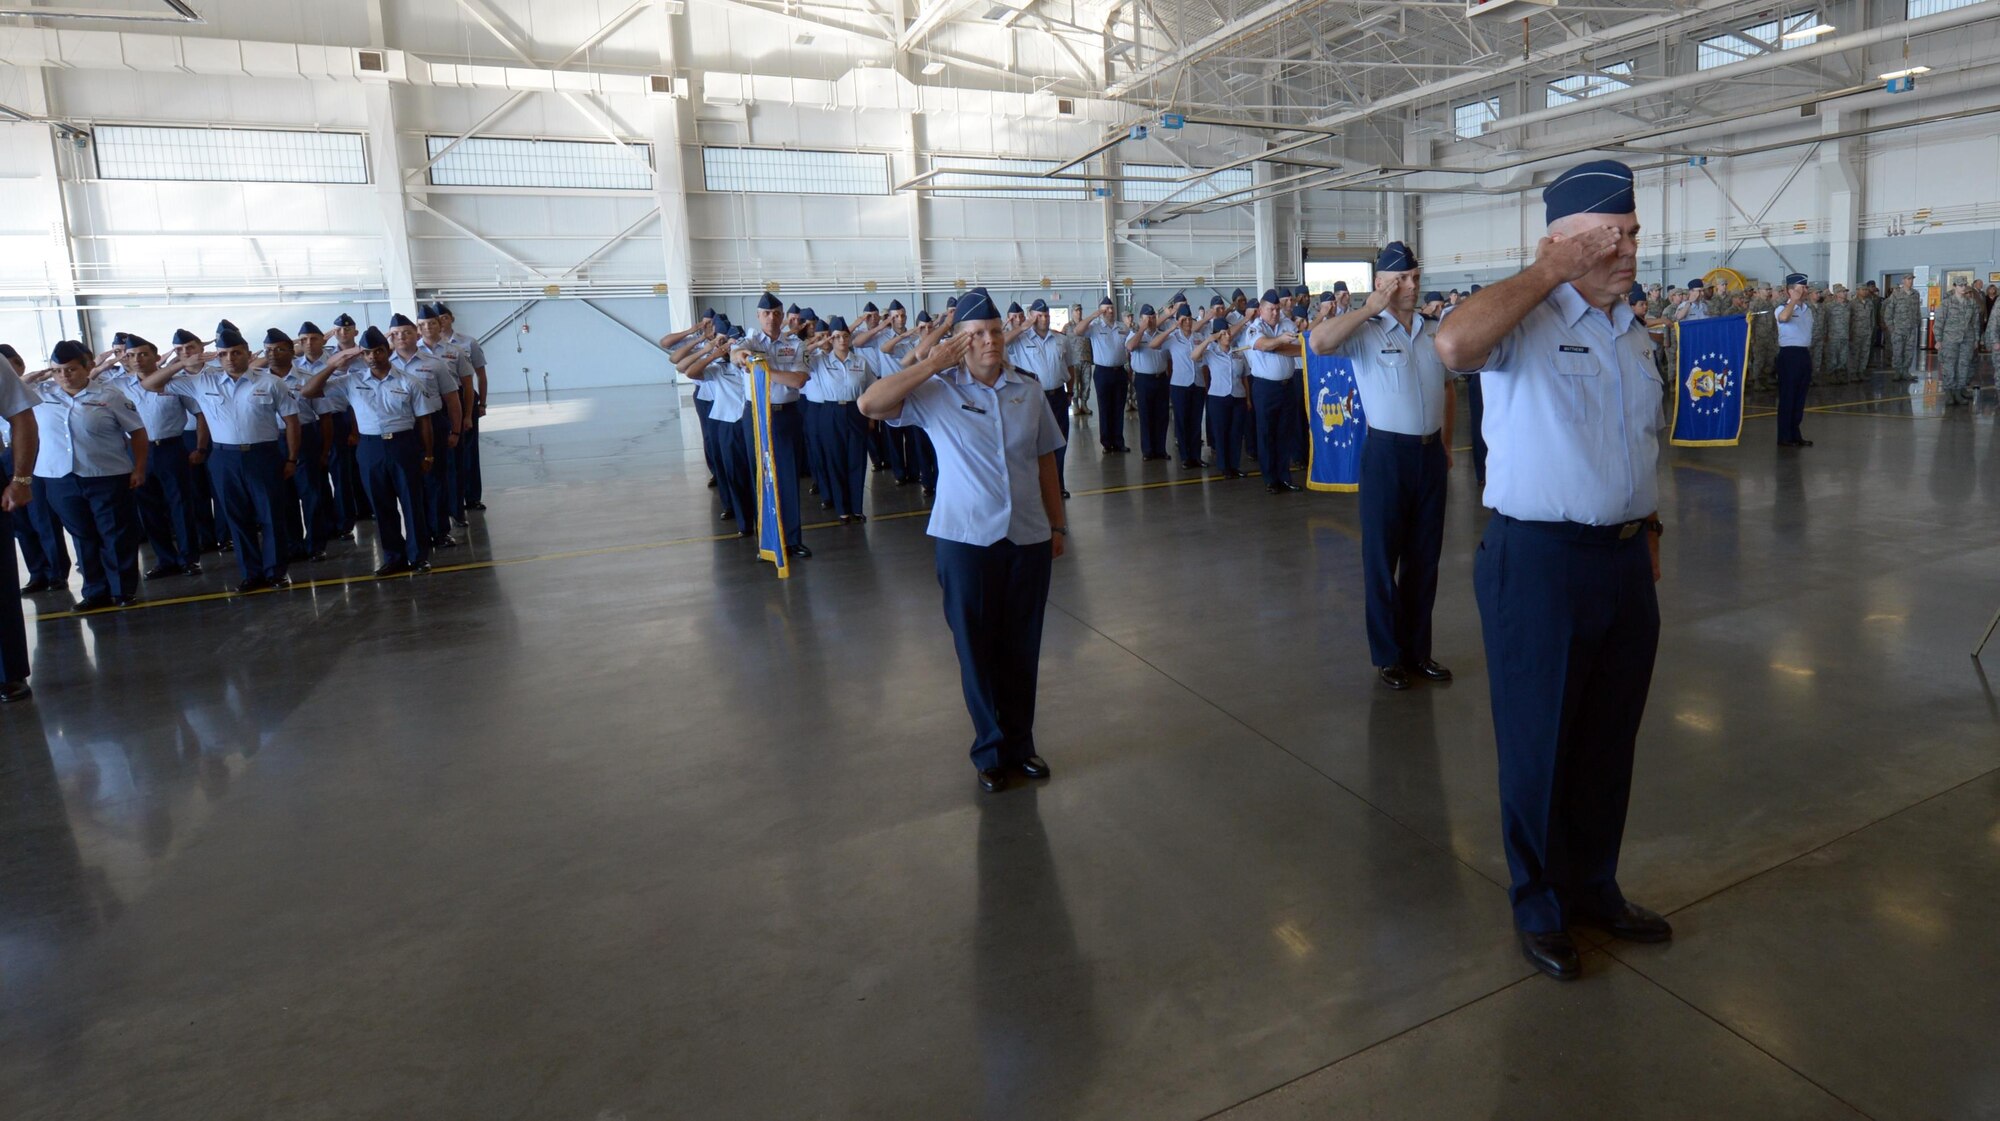 U.S. Air Force Col. Patrick Matthews, far right, Eighth Air Force vice commander, leads a five-group formation during a salute to the new commander at a change of command ceremony at Barksdale Air Force Base, La., Oct. 4, 2016. The five formations represented the five bomber wings under the organization. The Mighty Eighth encompasses all nuclear-capable and conventional bombers to include the B-1, B-52 and B-2. (U.S. Air Force photo by Senior Airman Curtis Beach) 